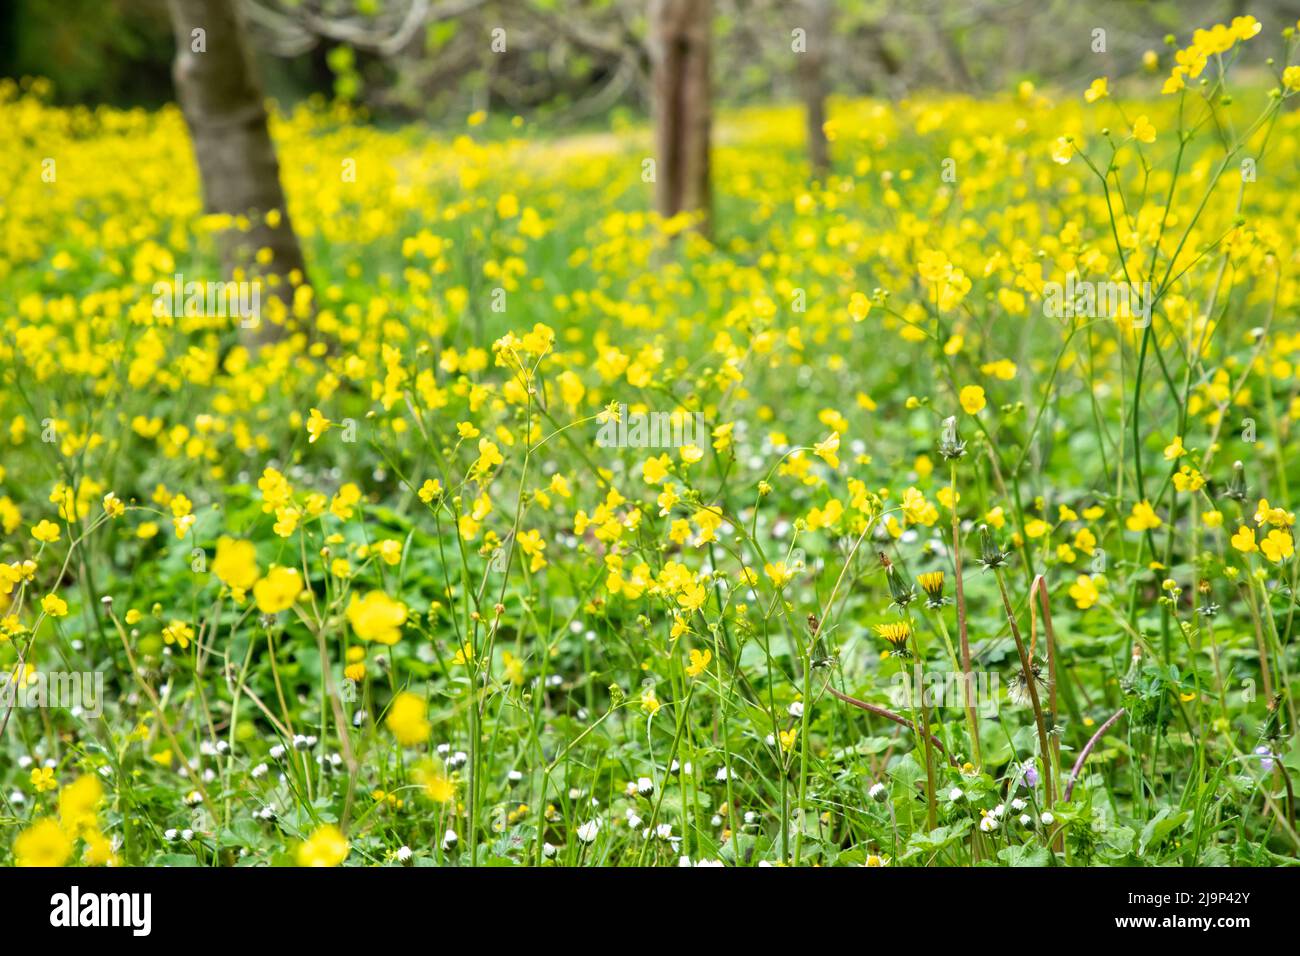 Ranunculus acris or buttercups. Common names include meadow buttercup, tall buttercup, common buttercup and giant buttercup. Stock Photo